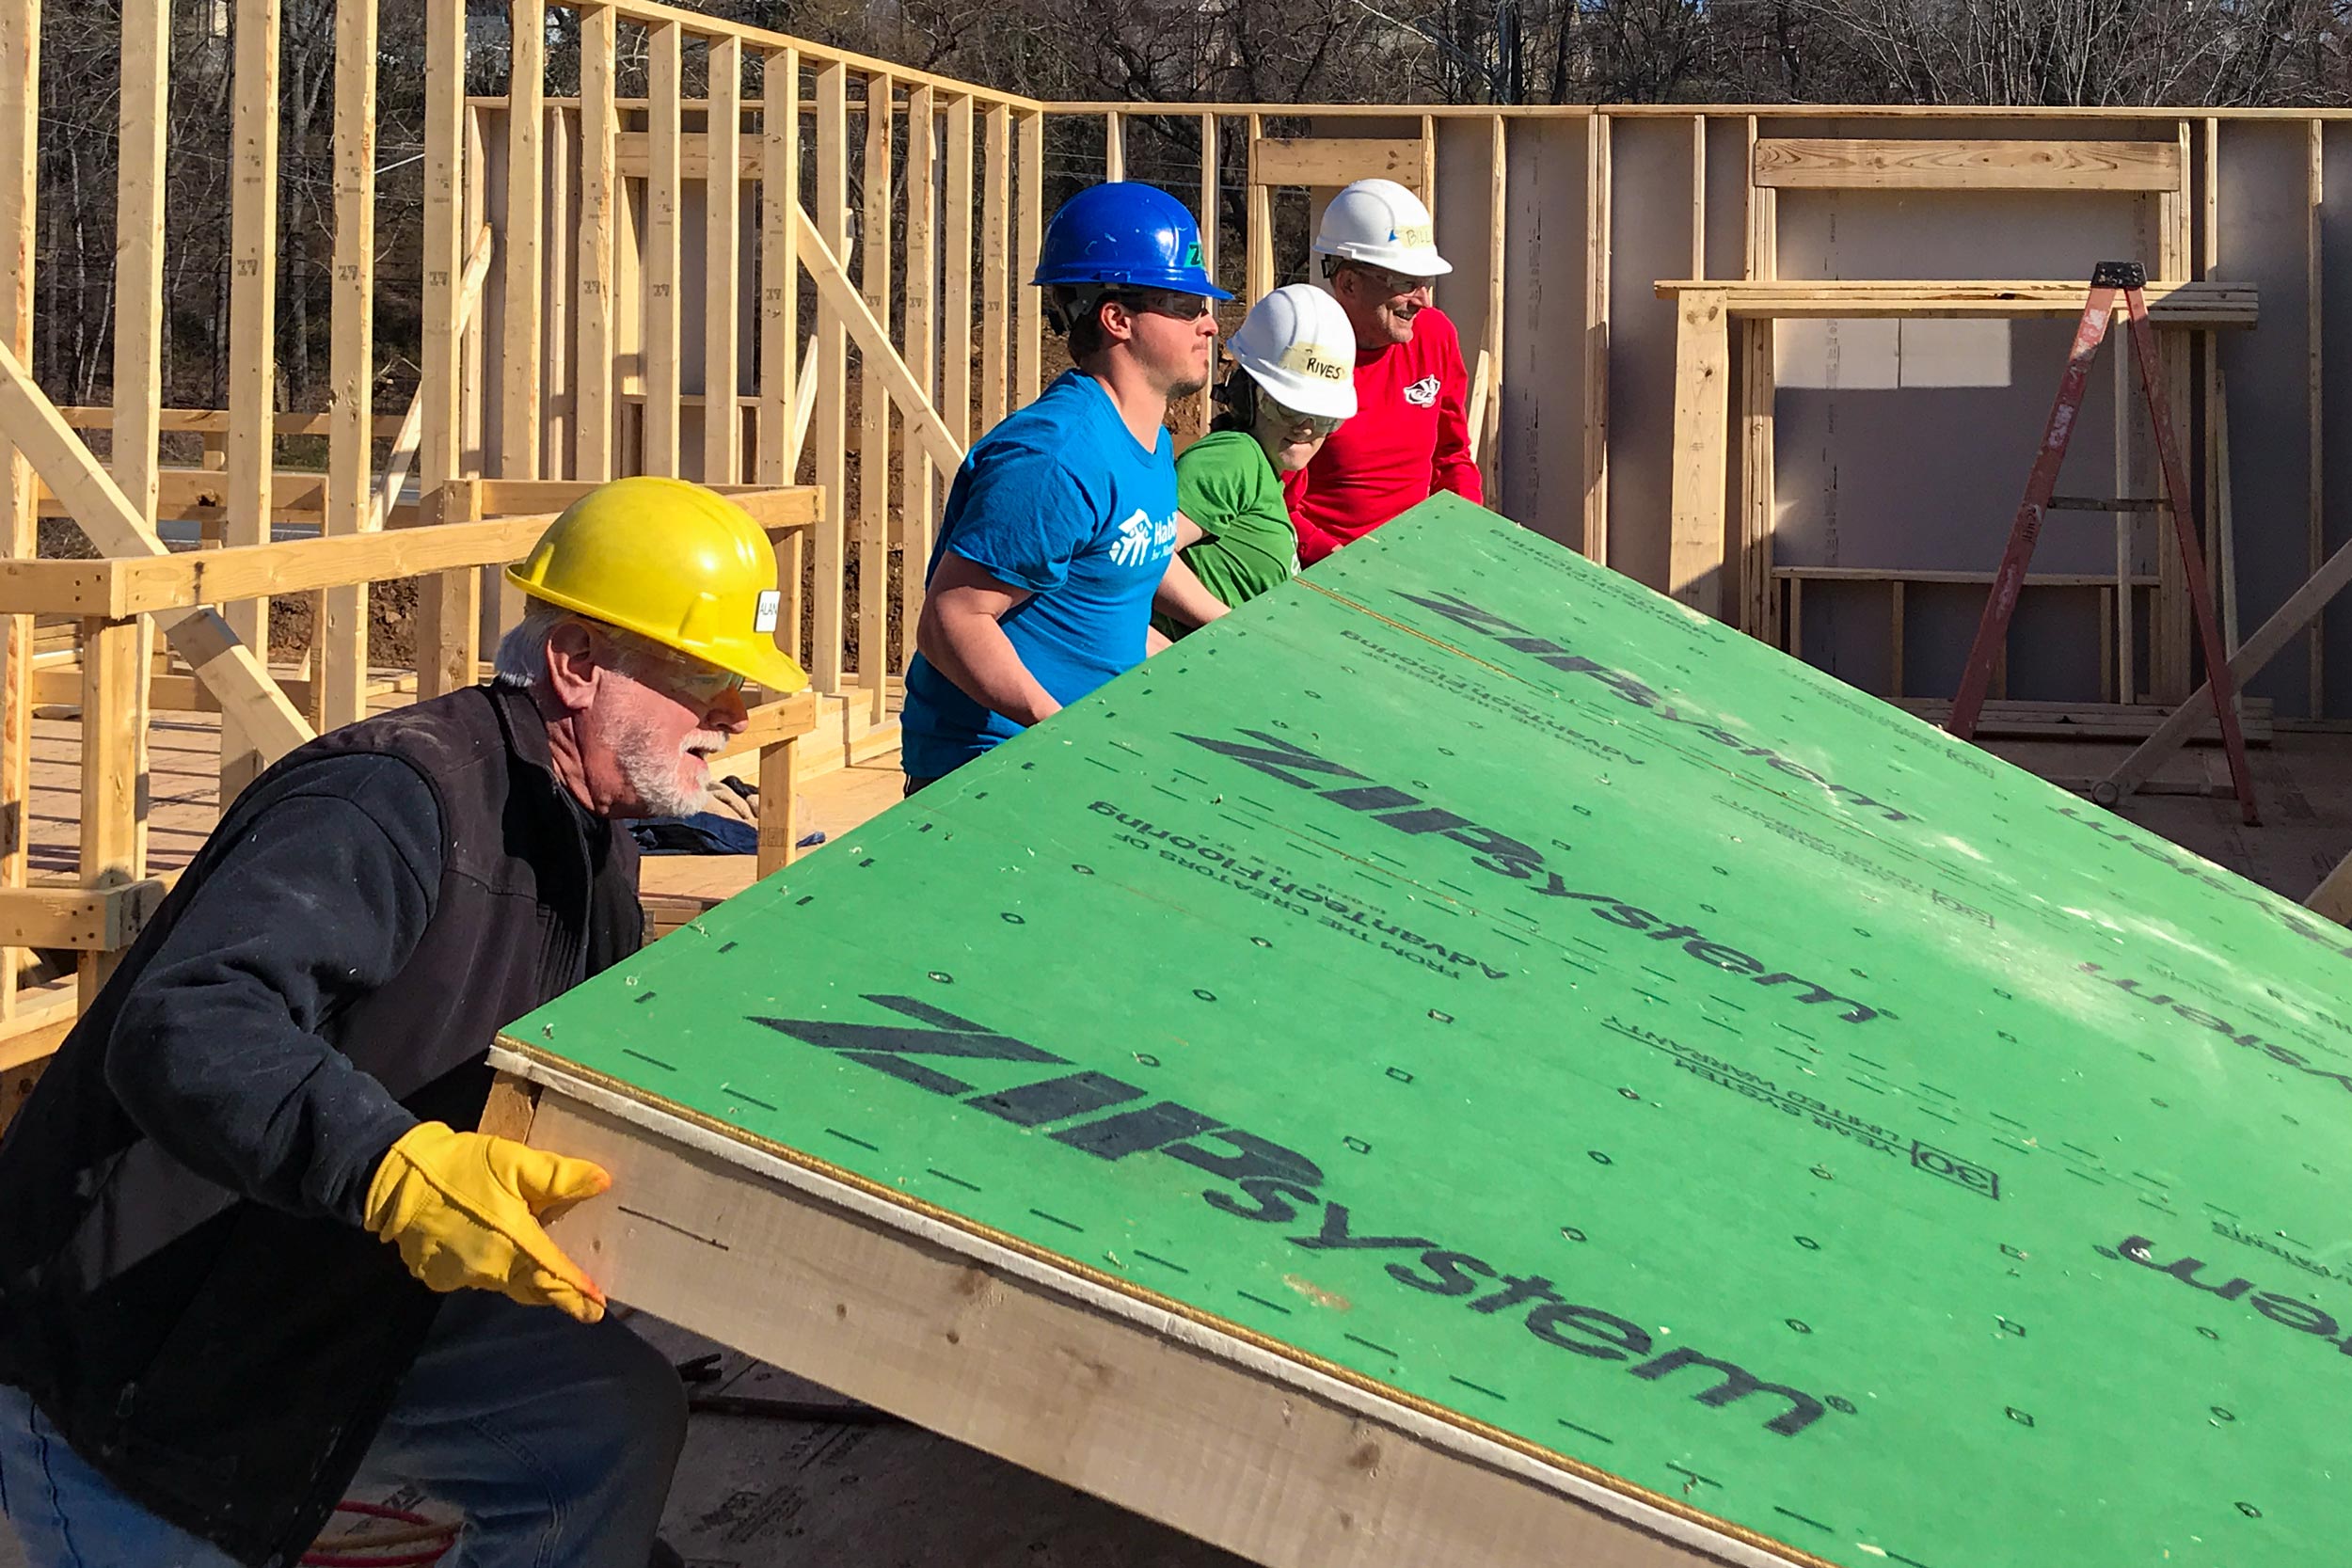 Volunteers help to raise a wall on a construction site